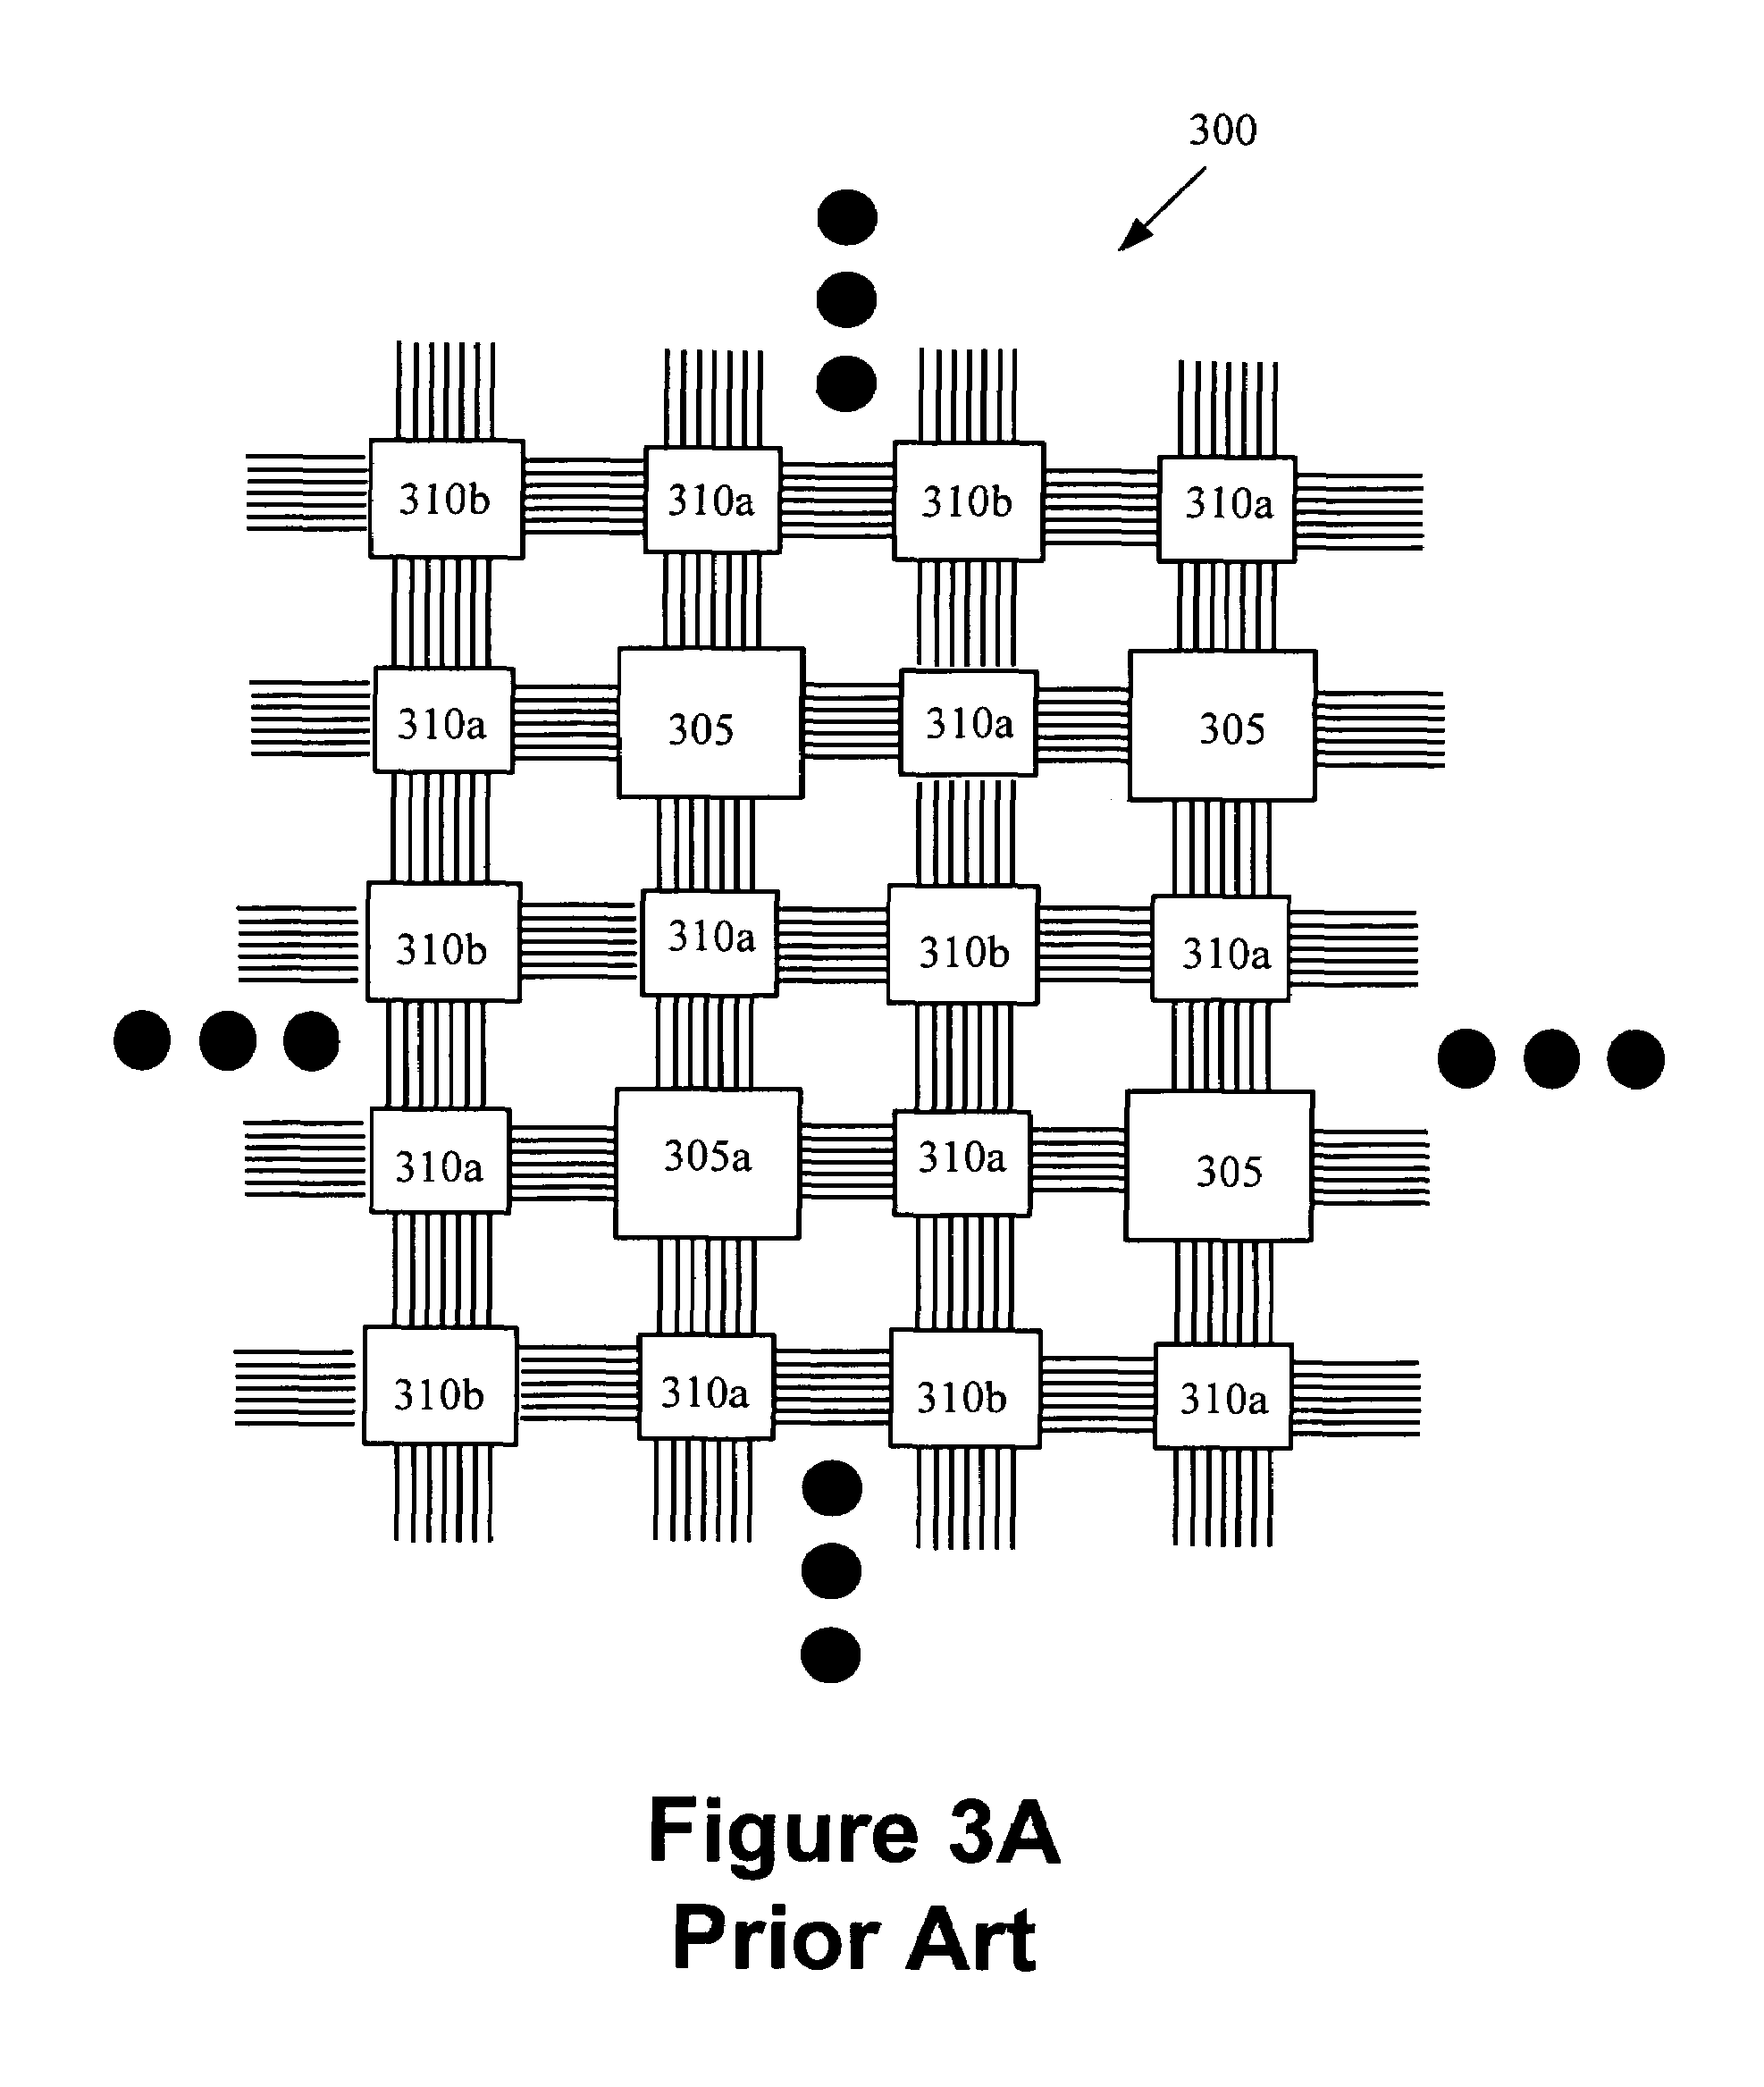 User registers implemented with routing circuits in a configurable IC